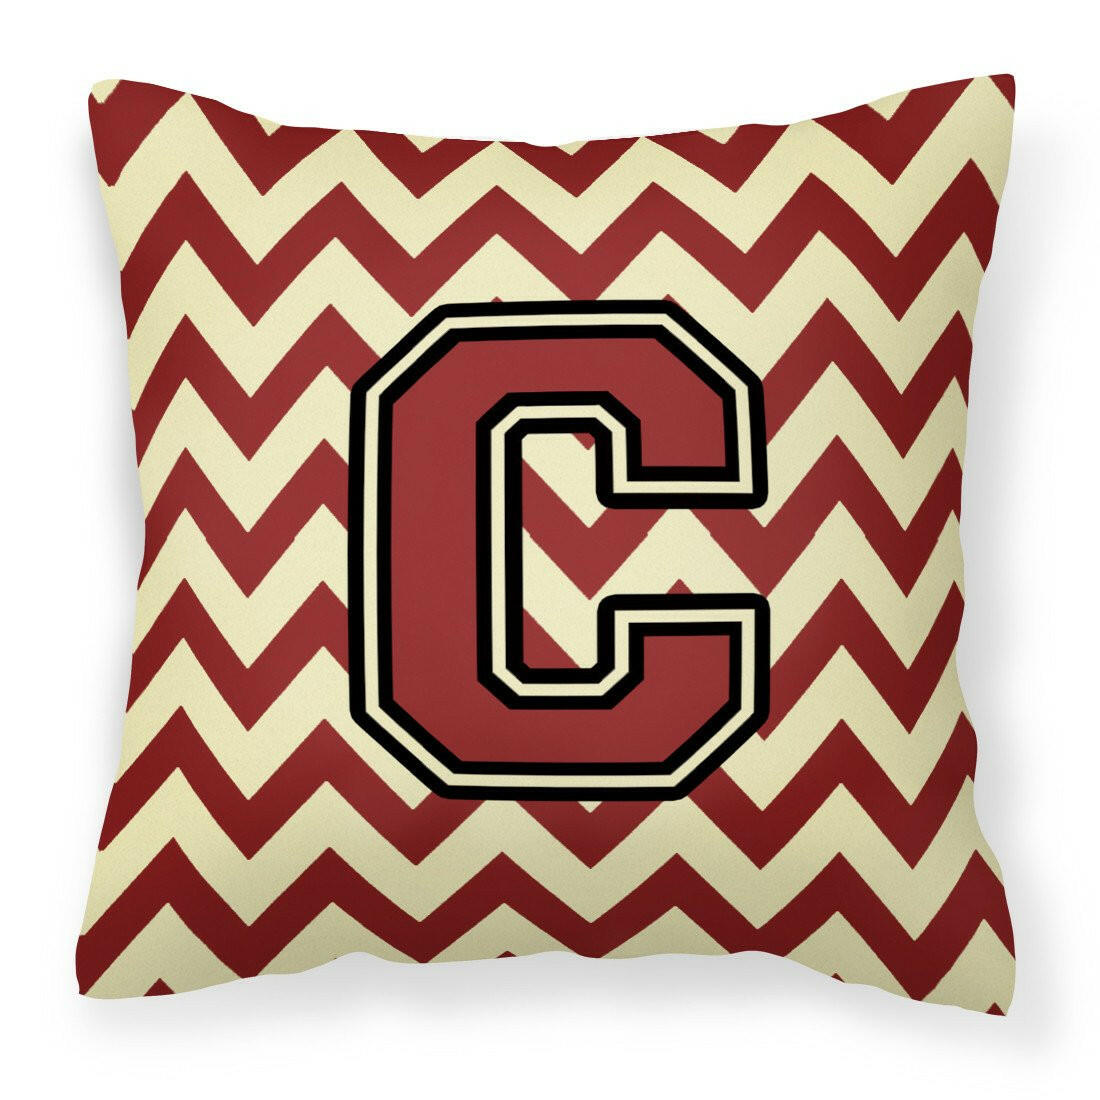 Letter C Chevron Maroon and Gold Fabric Decorative Pillow CJ1061-CPW1414 by Caroline's Treasures